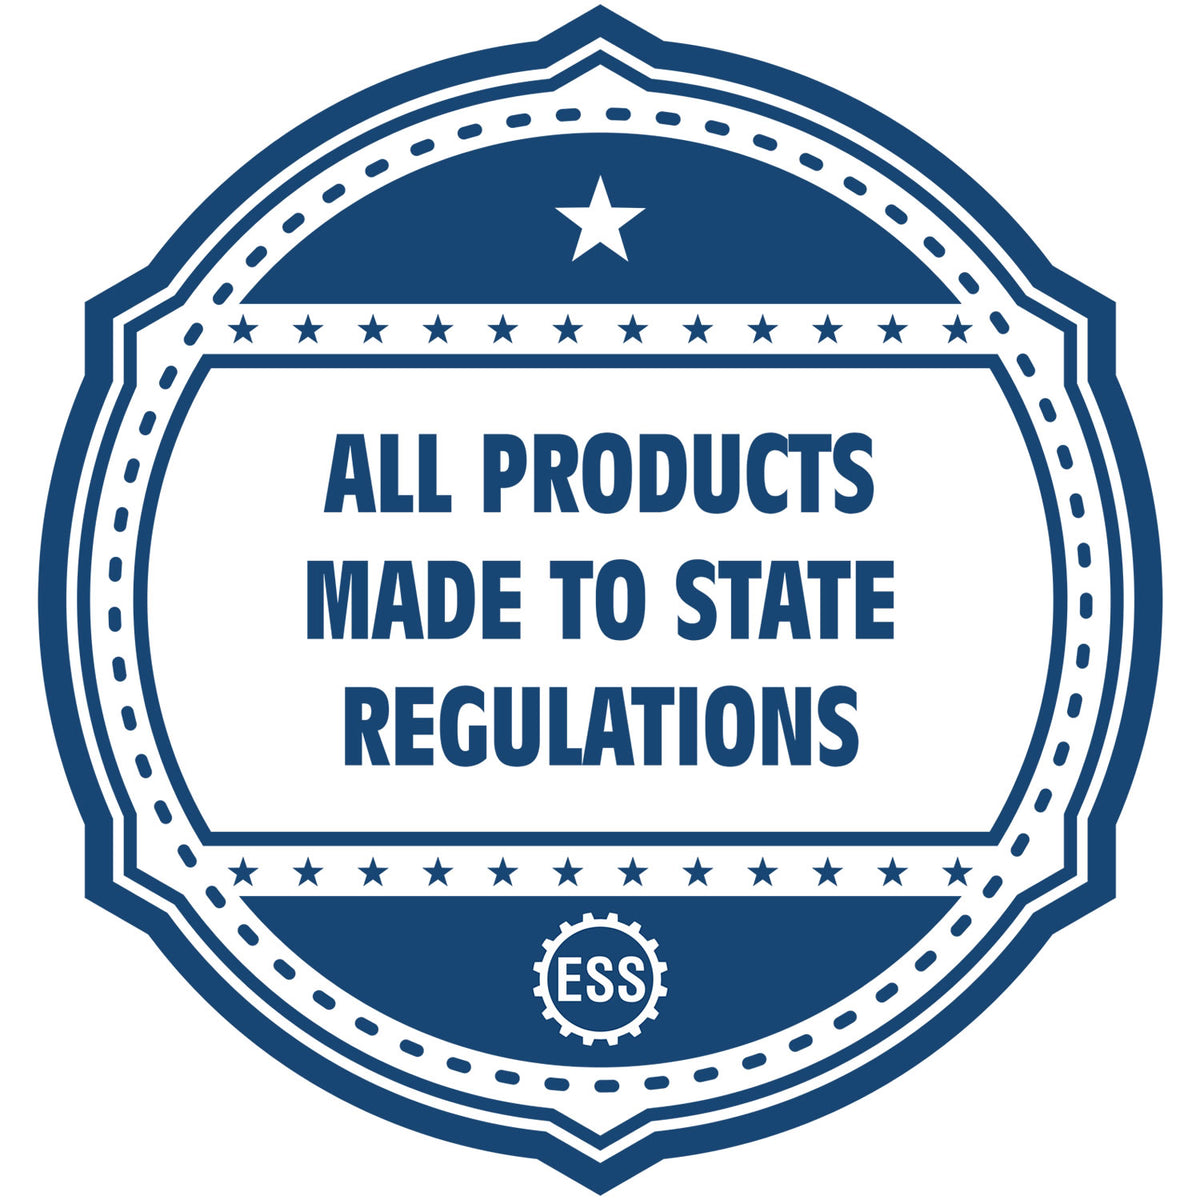 An icon or badge element for the Extended Long Reach Delaware Architect Seal Embosser showing that this product is made in compliance with state regulations.